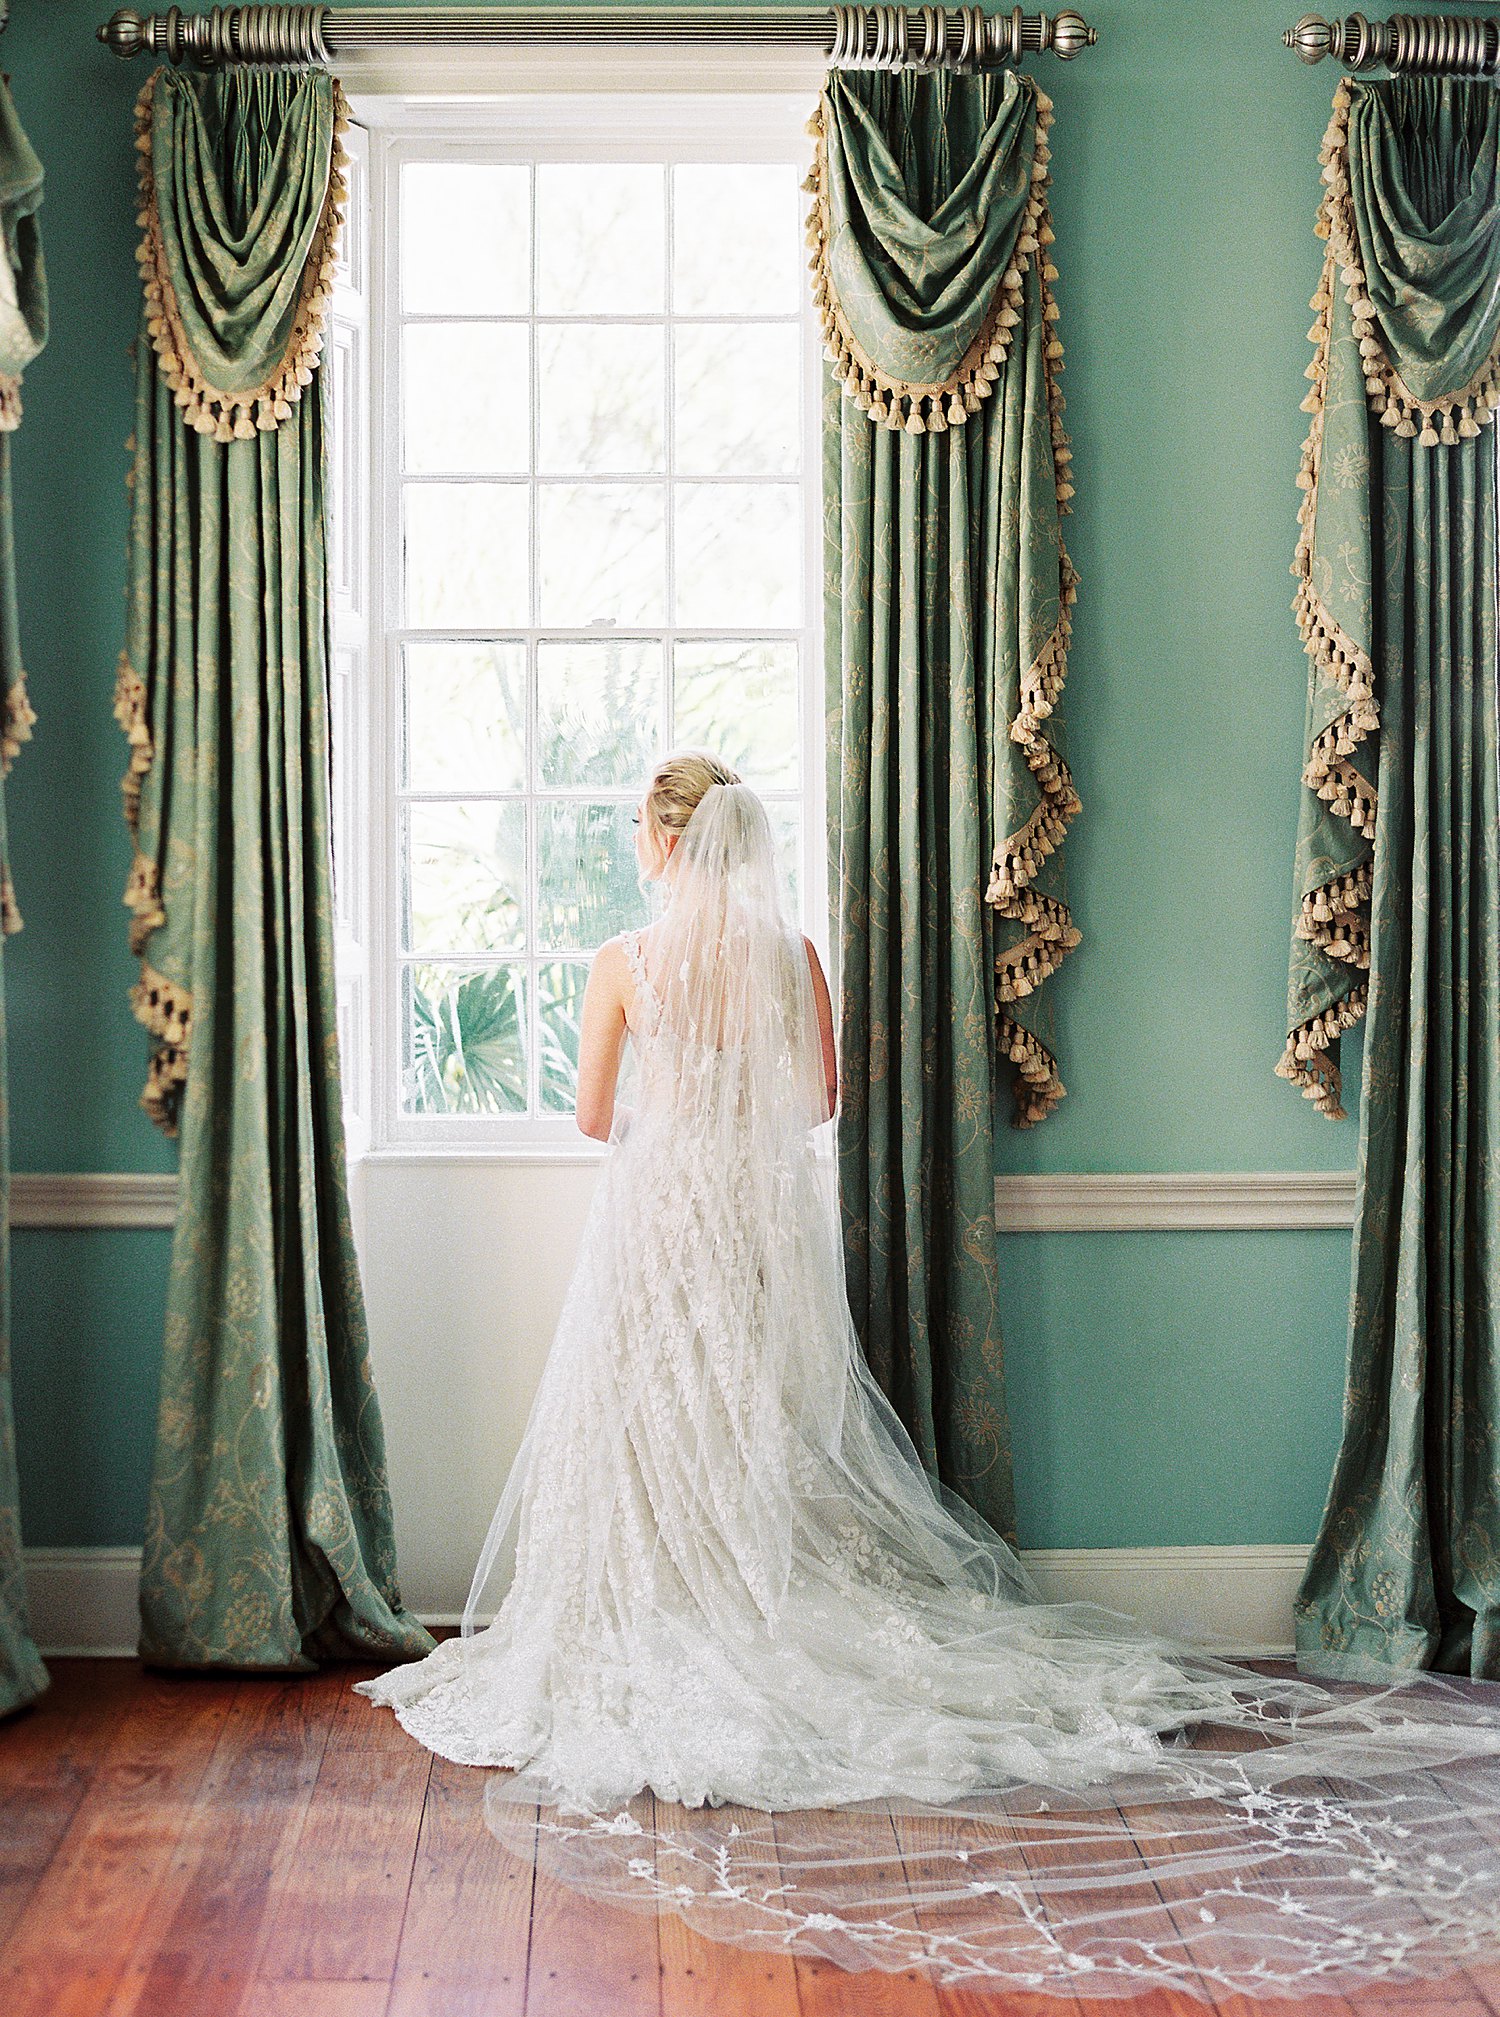 Bride in white wedding dress standing at window with green curtains at Lowndes Grove